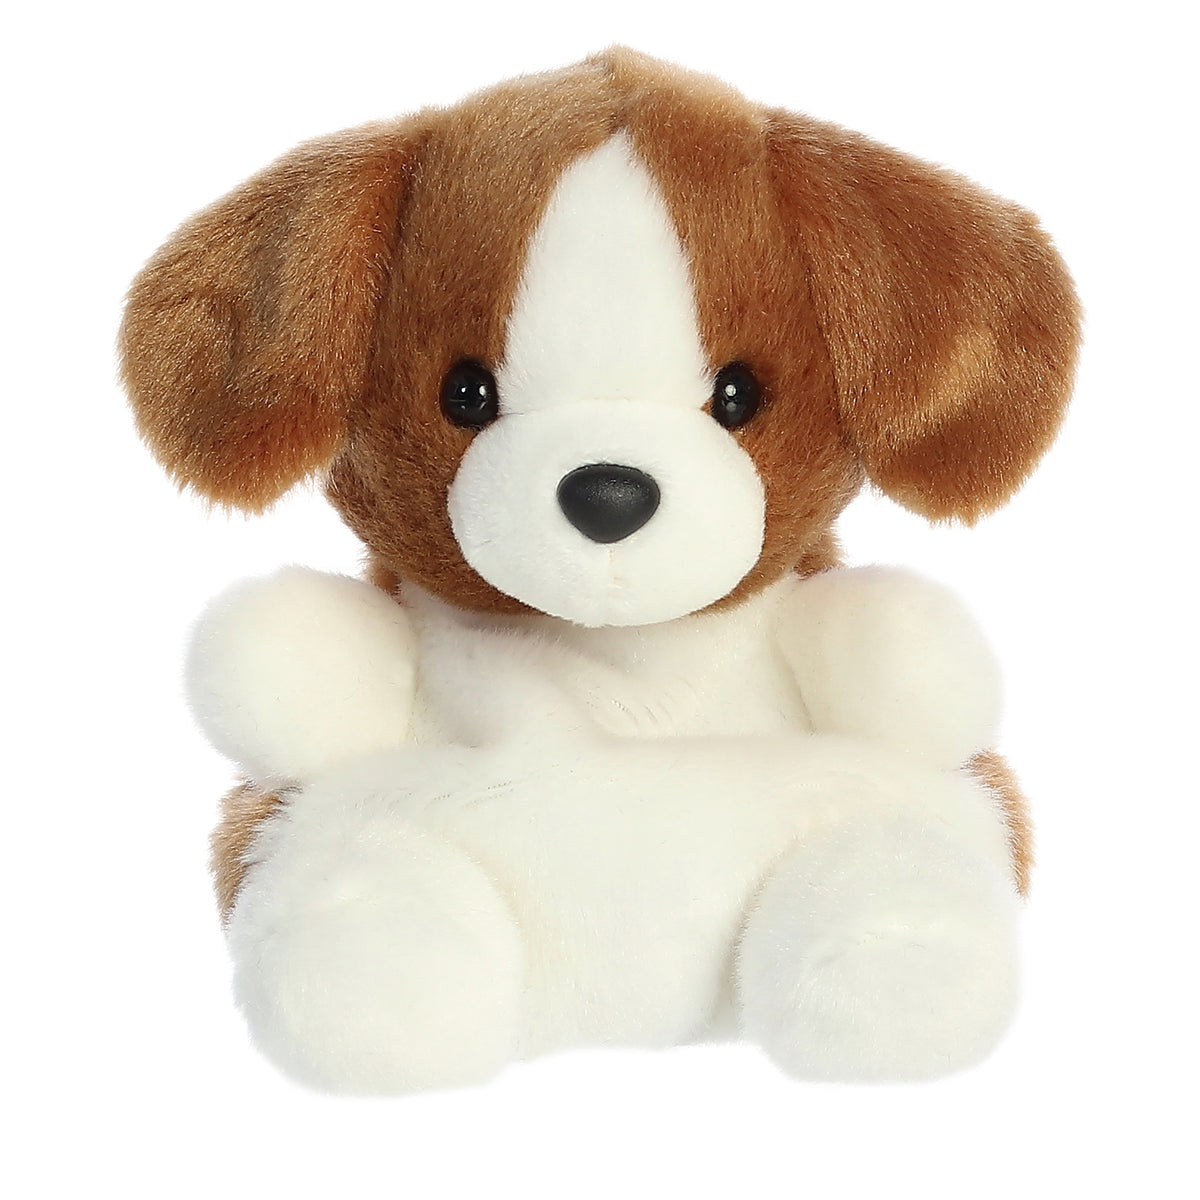 Buster Beagle plush from Palm Pals, with a caramel and white coat, embodies joy and loyalty, perfect for companionship.